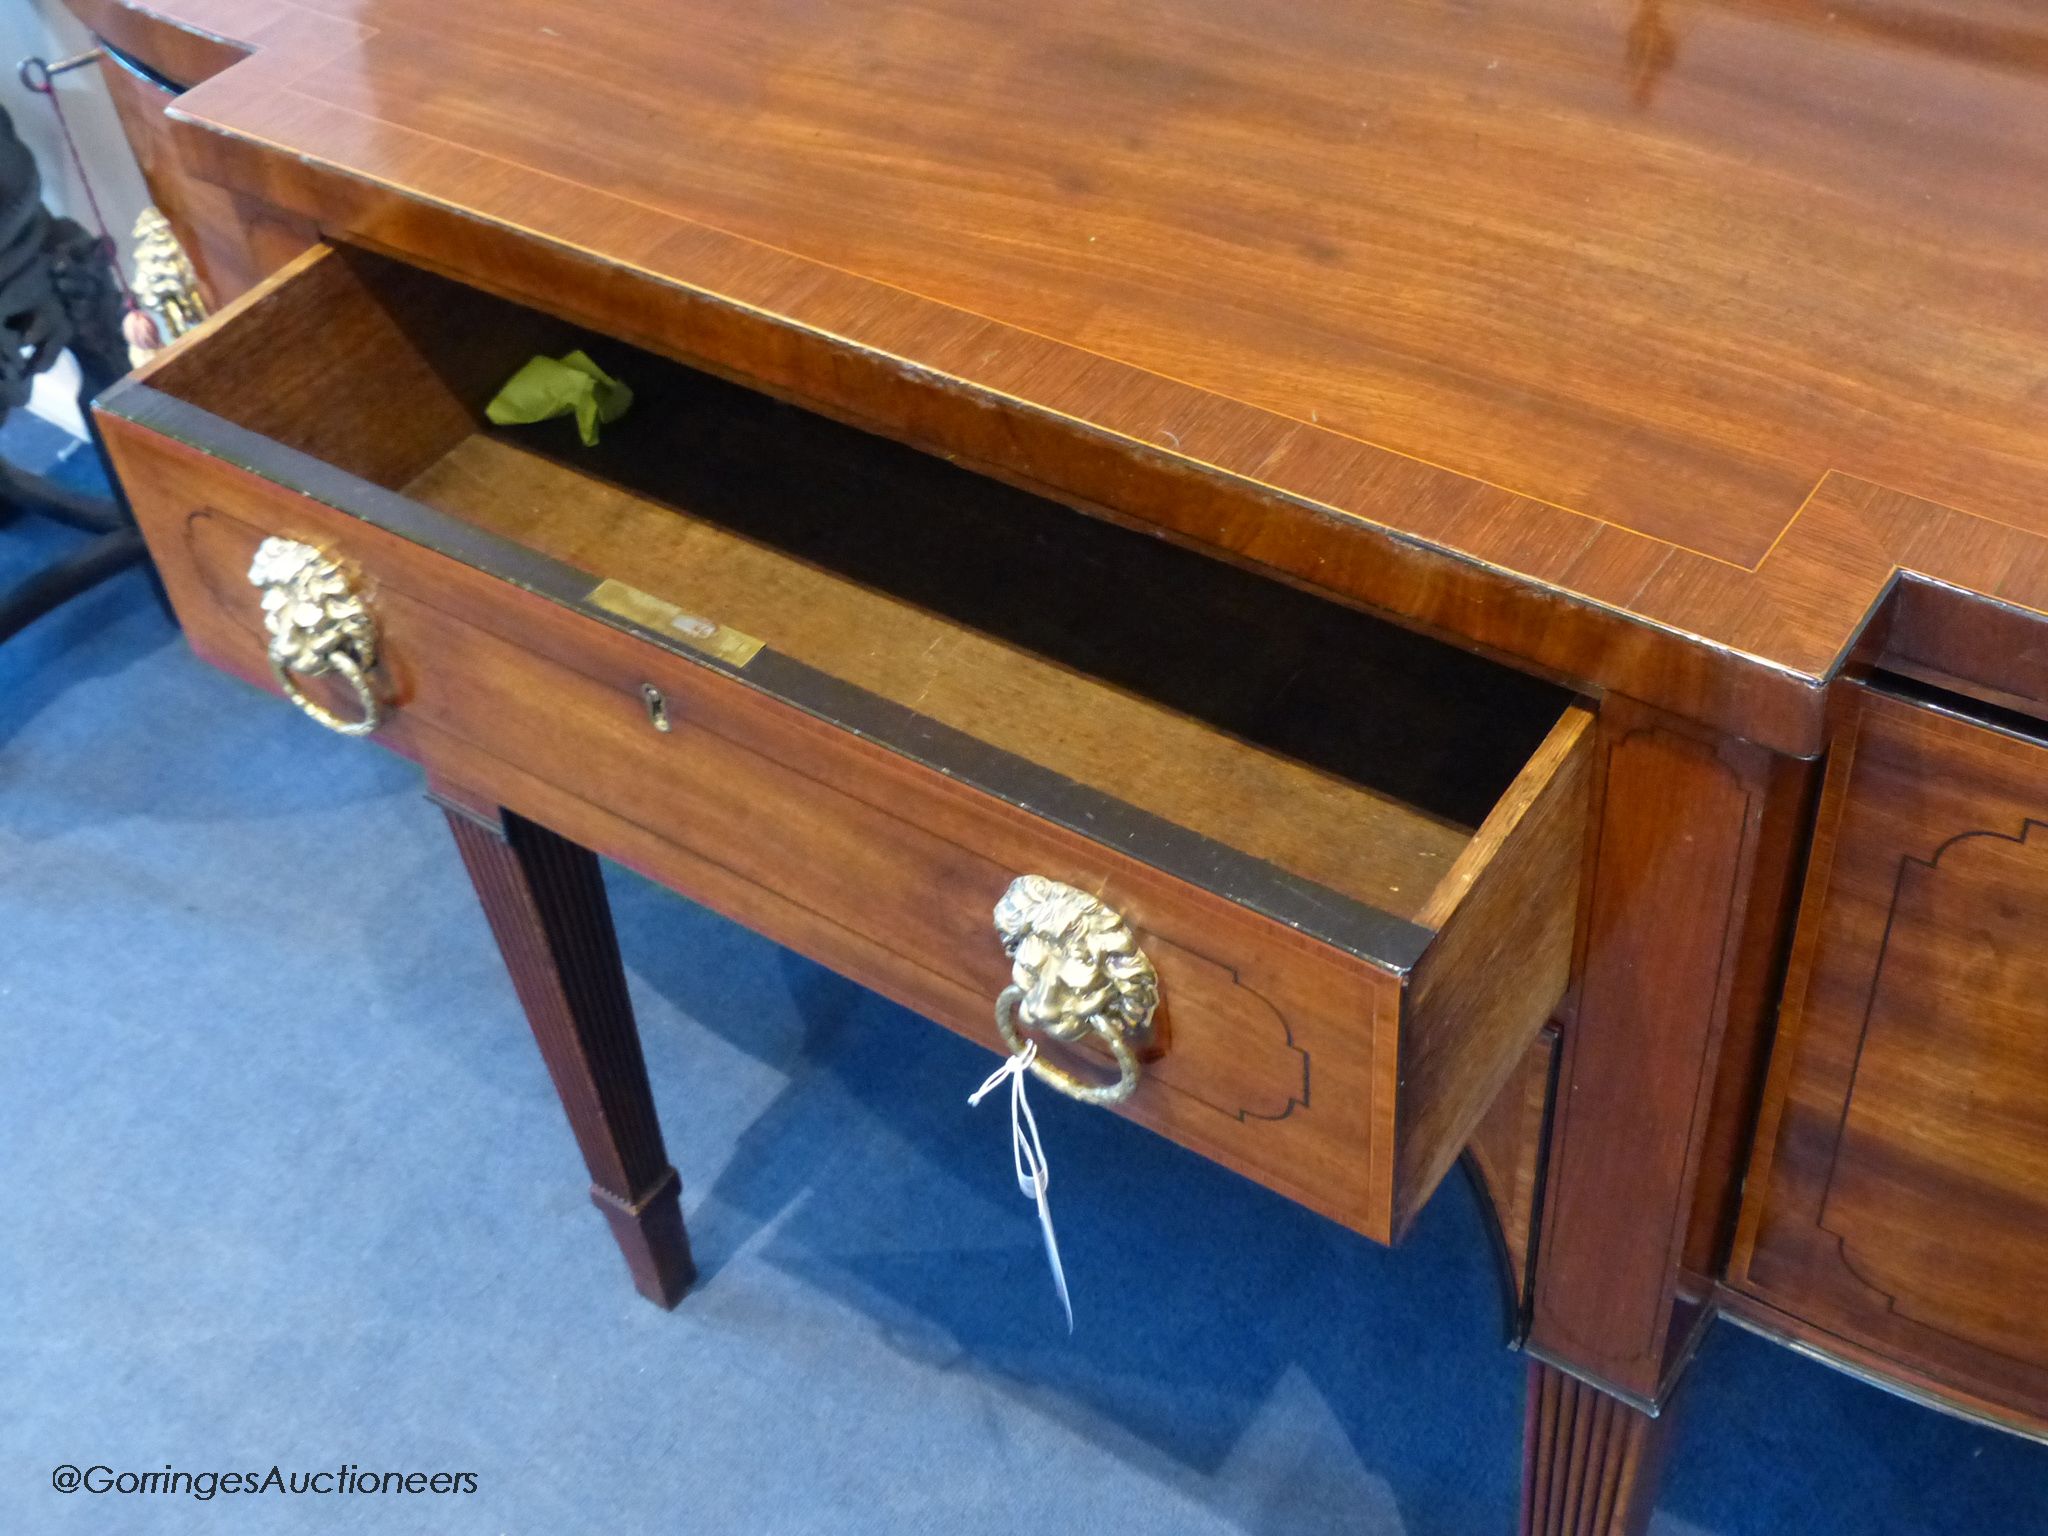 A George III mahogany bow-breakront sideboard, 152cm long, 116.5 cm high to top brass rail, 76 cm deep